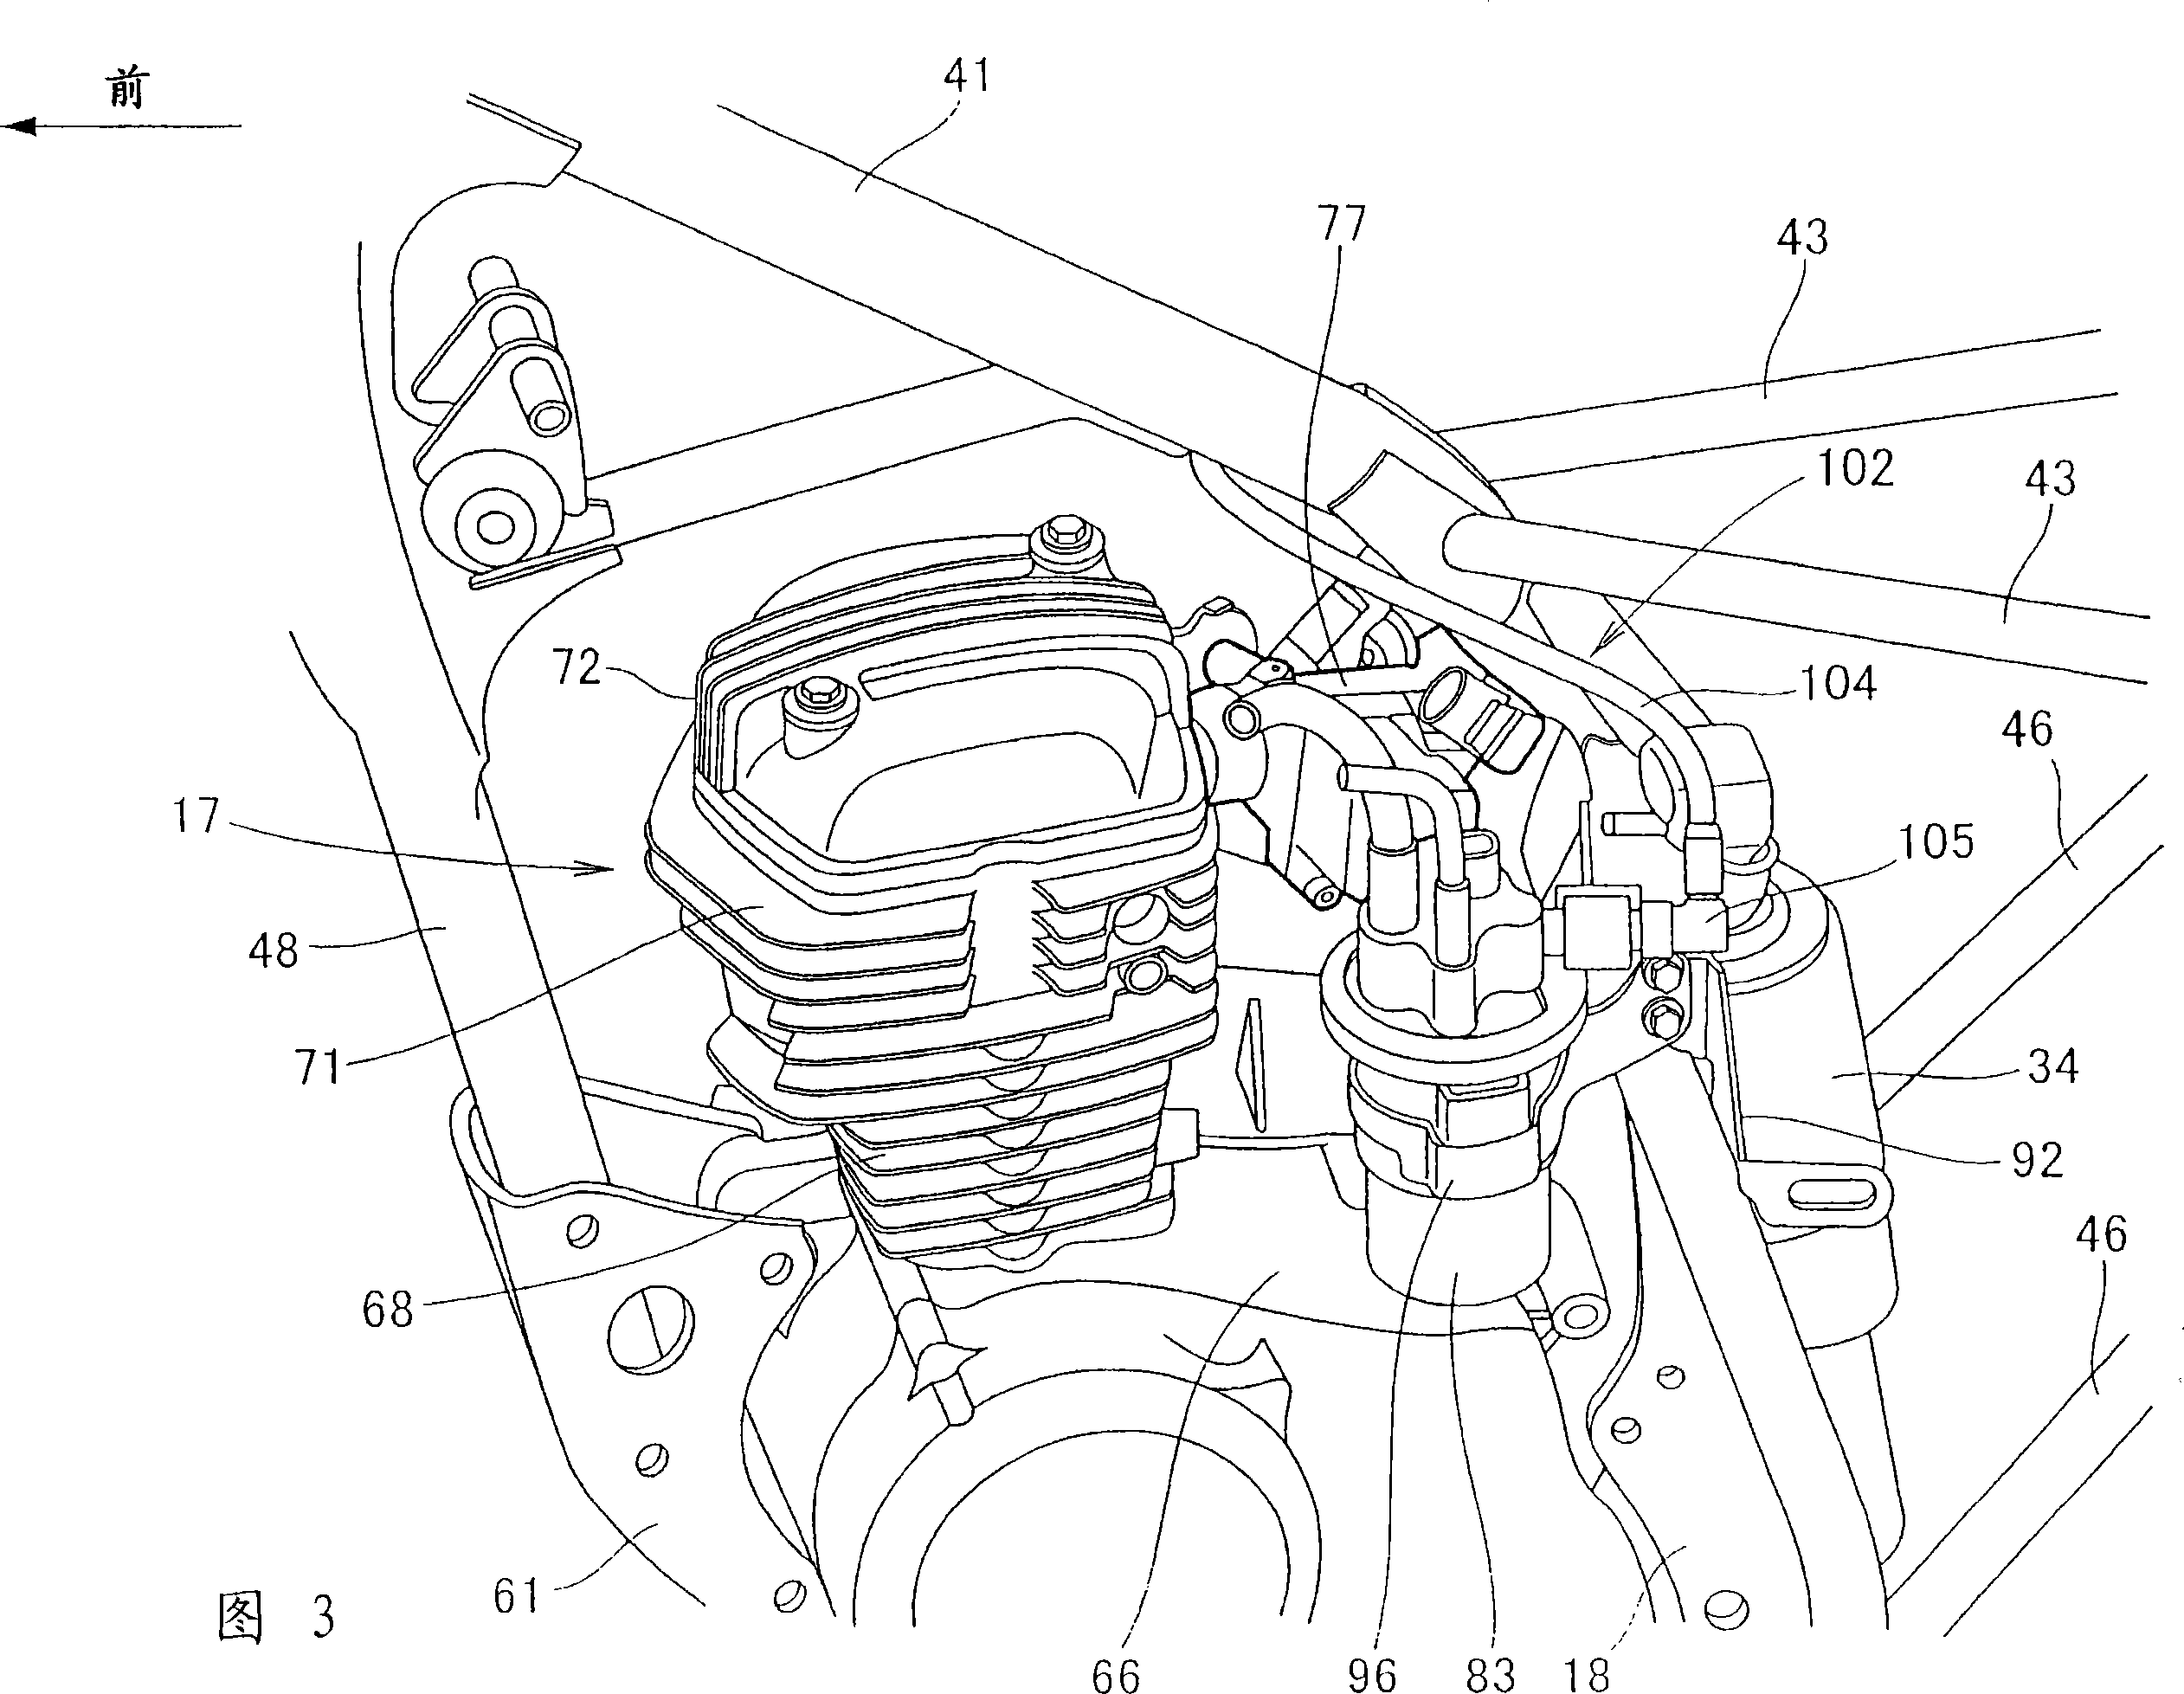 Fuel pump configuring structure of vehicle